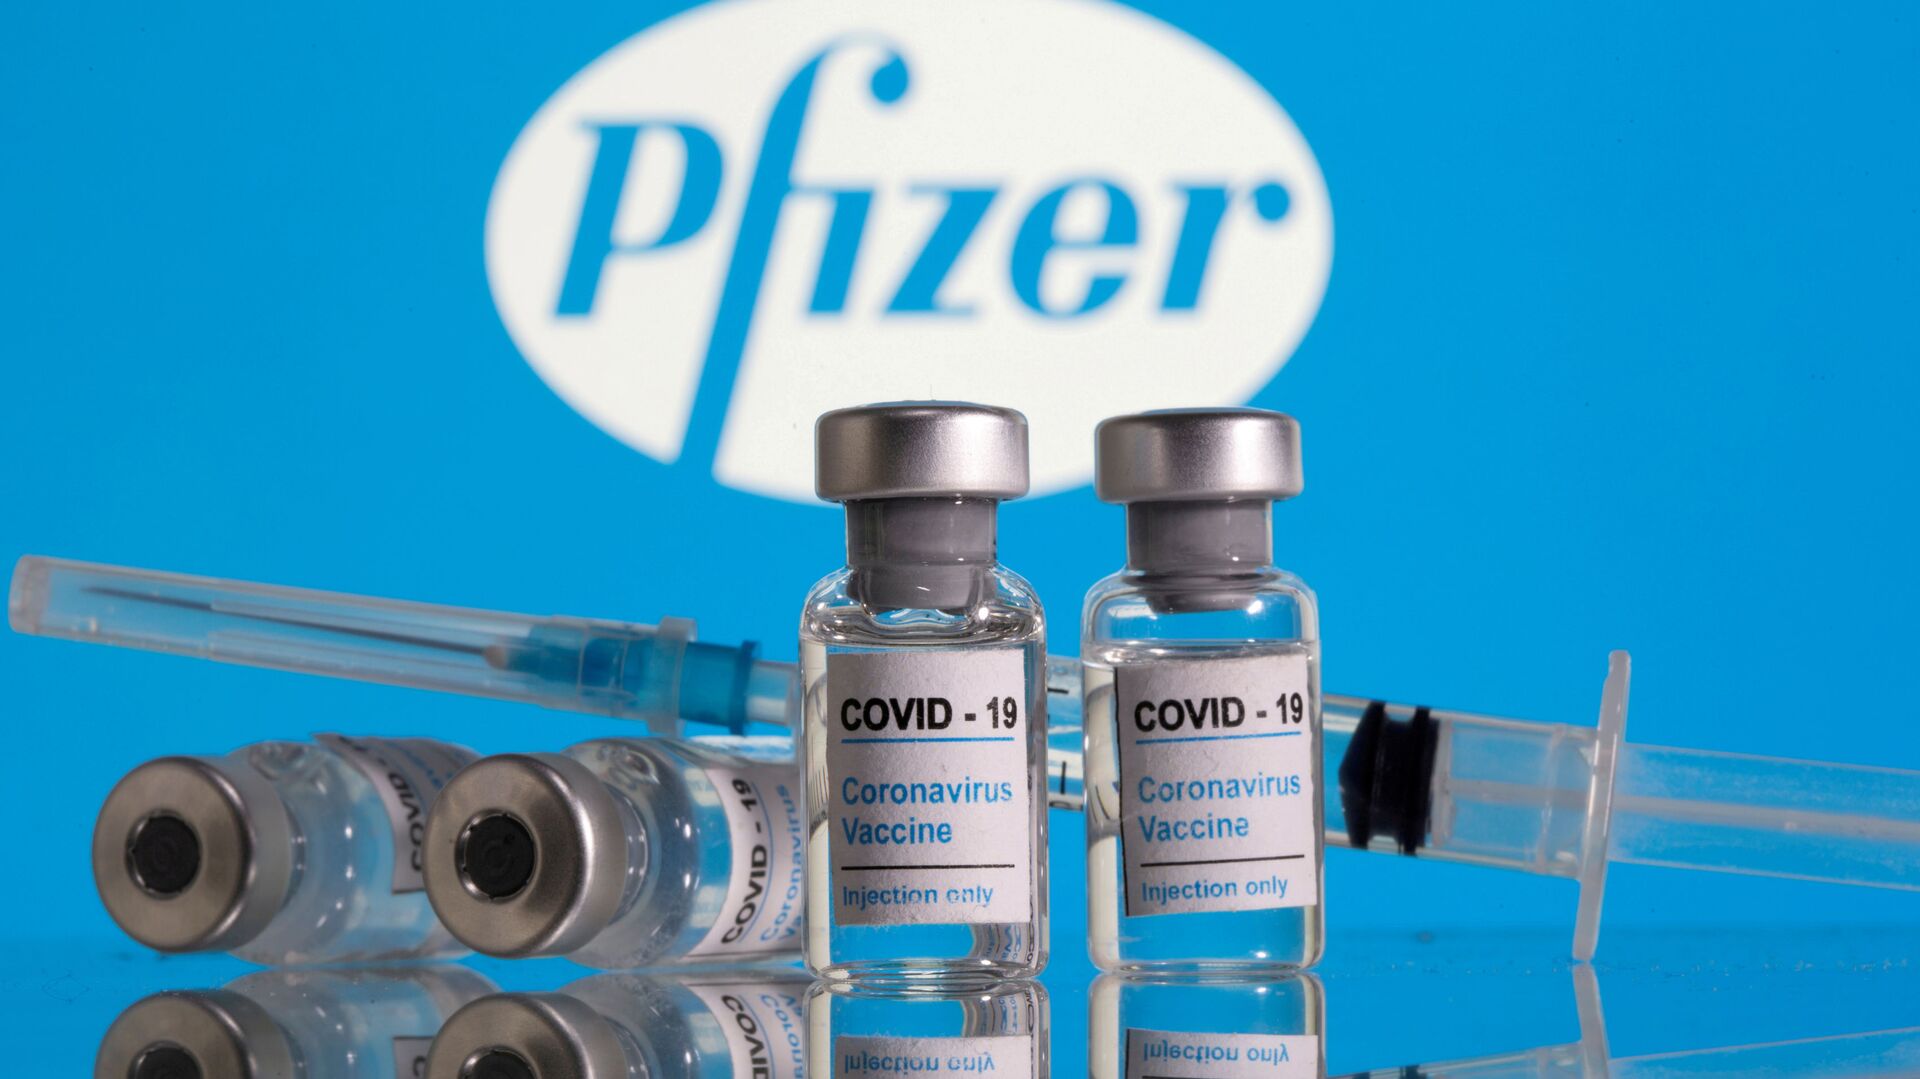 Vials labelled COVID-19 Coronavirus Vaccine and a syringe are seen in front of the Pfizer logo in this illustration taken February 9, 2021 - Sputnik 日本, 1920, 27.05.2021